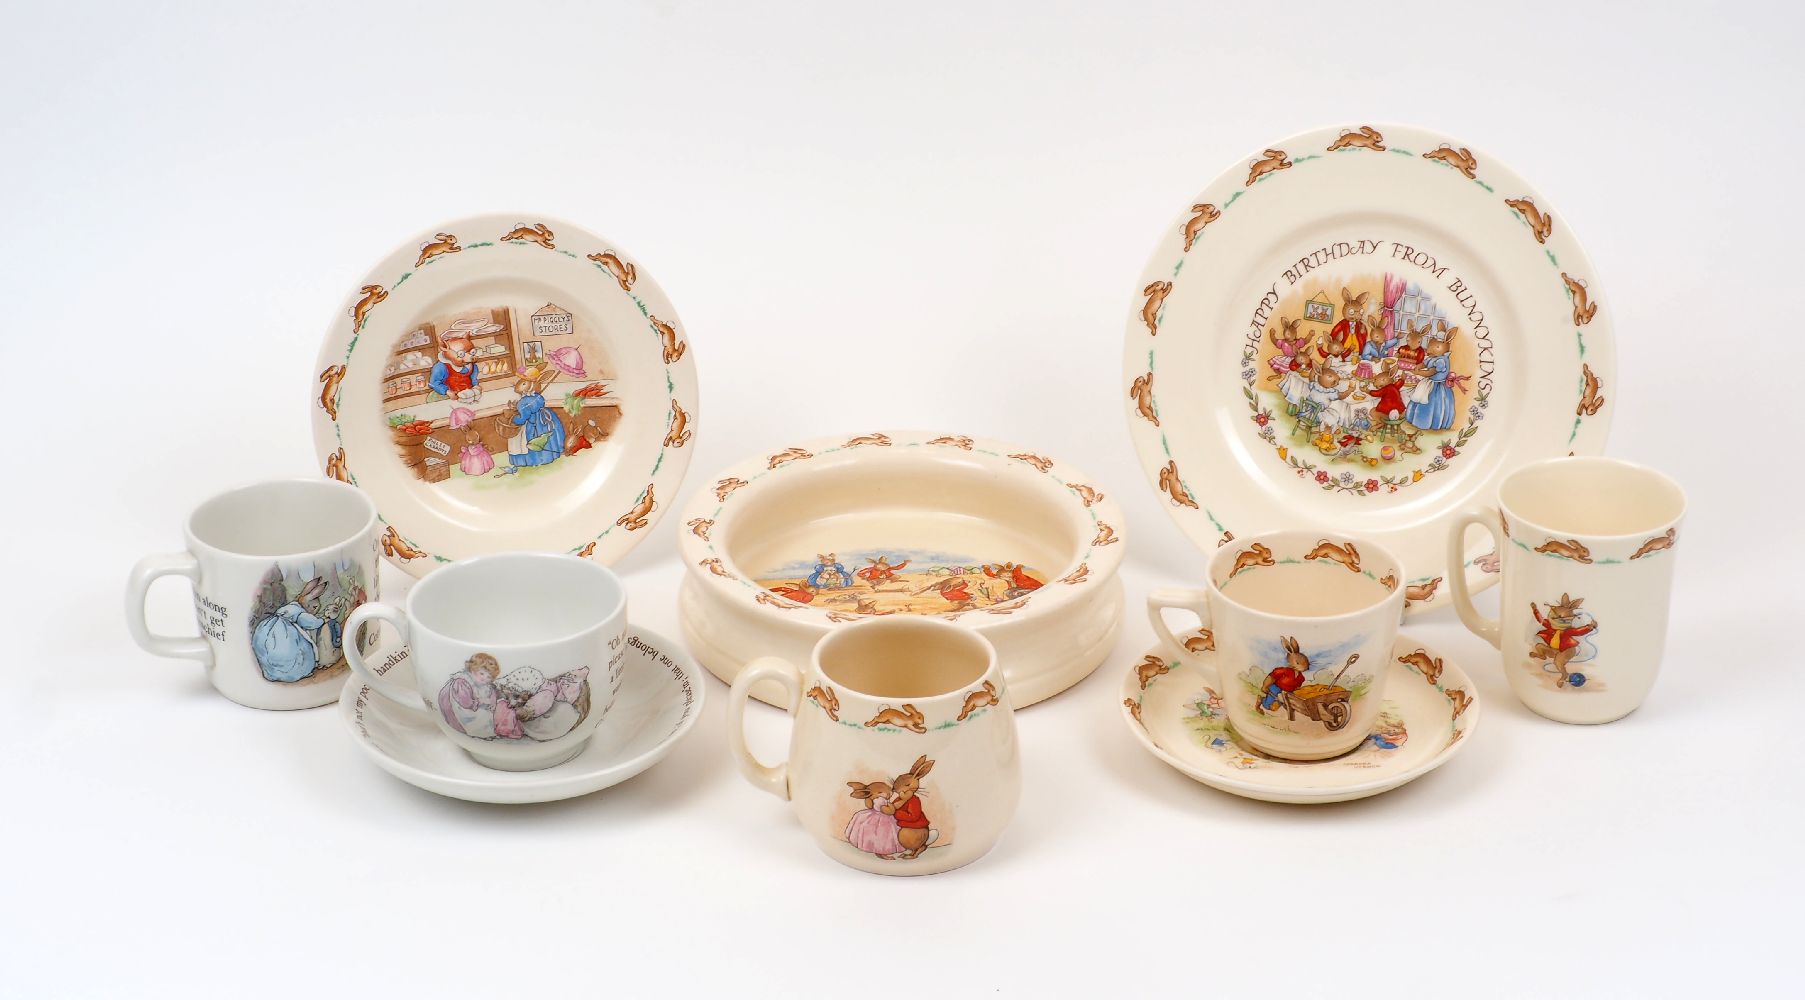 A group of Royal Doulton 'Bunnykins' table wares, to include a child's cereal bowl, teacup and